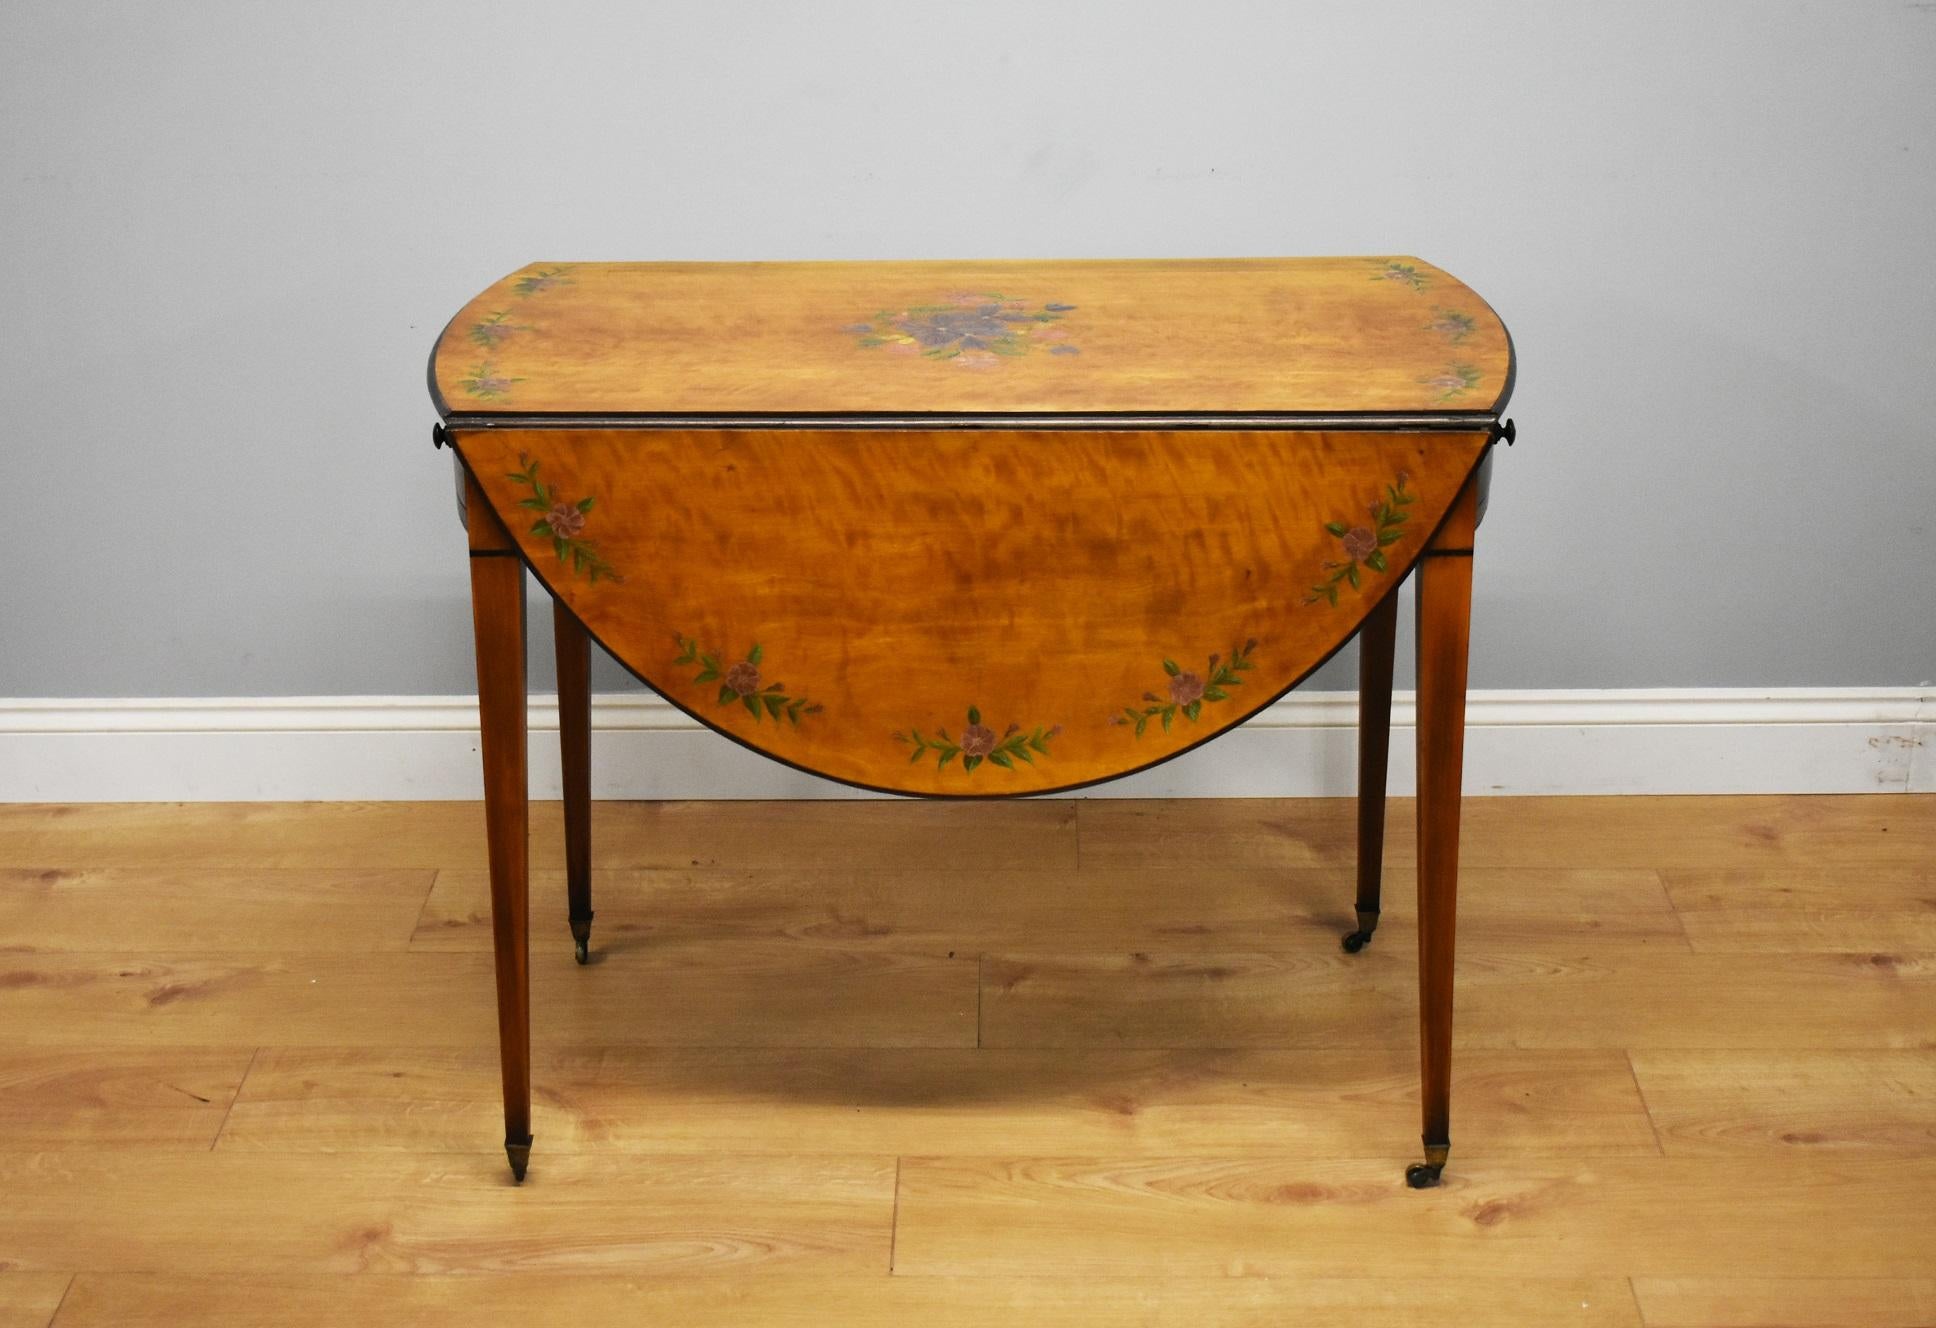 20th Century Edwardian Satinwood Hand Painted Pembroke Table In Good Condition For Sale In Chelmsford, Essex